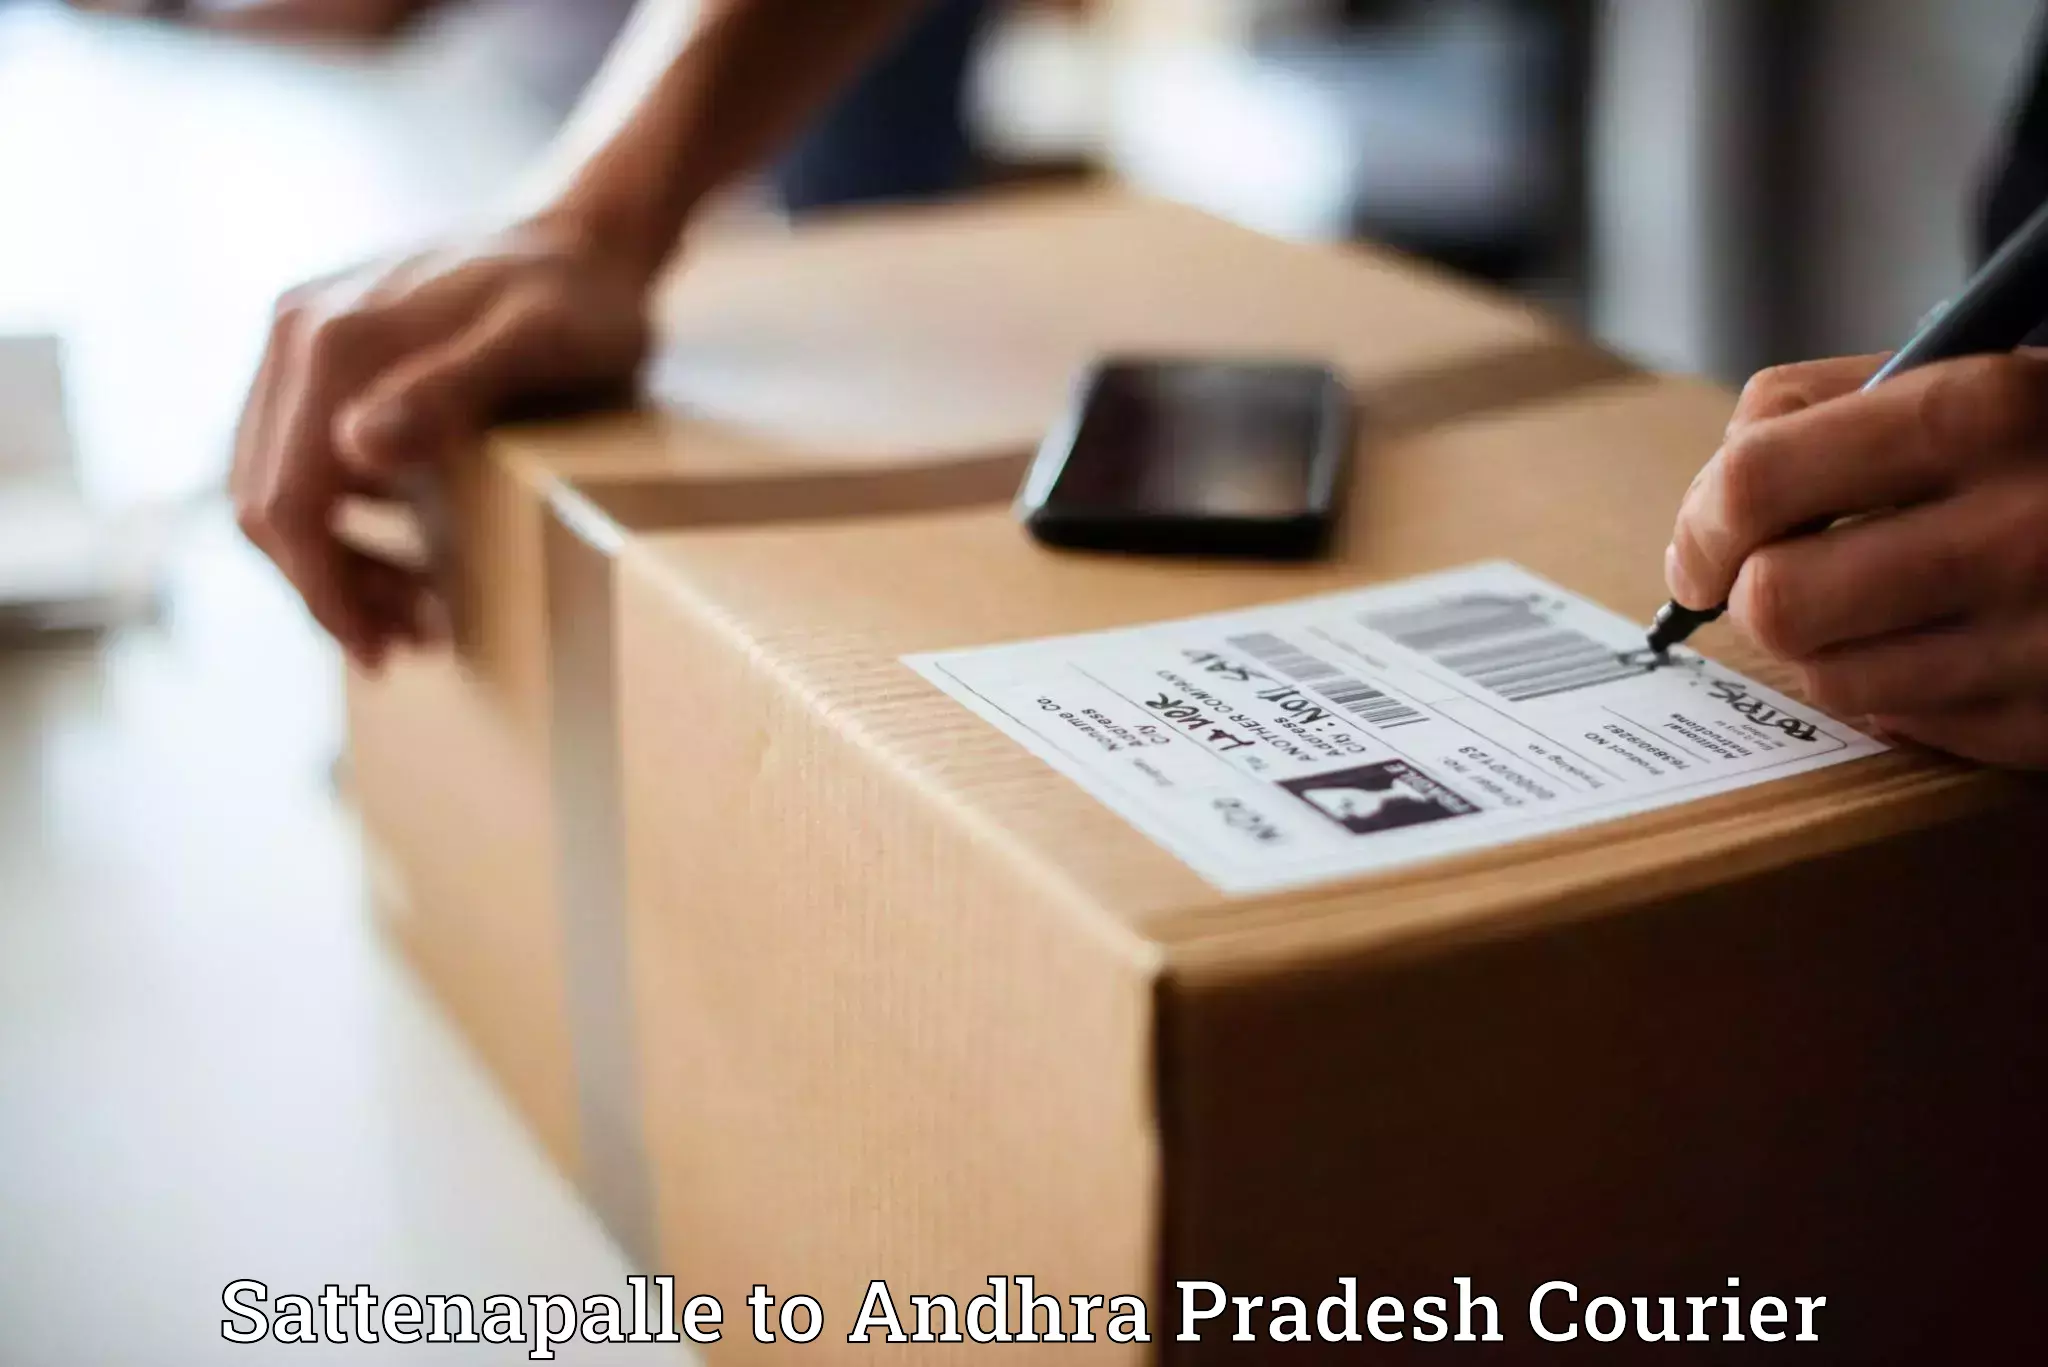 State-of-the-art courier technology Sattenapalle to Cuddapah